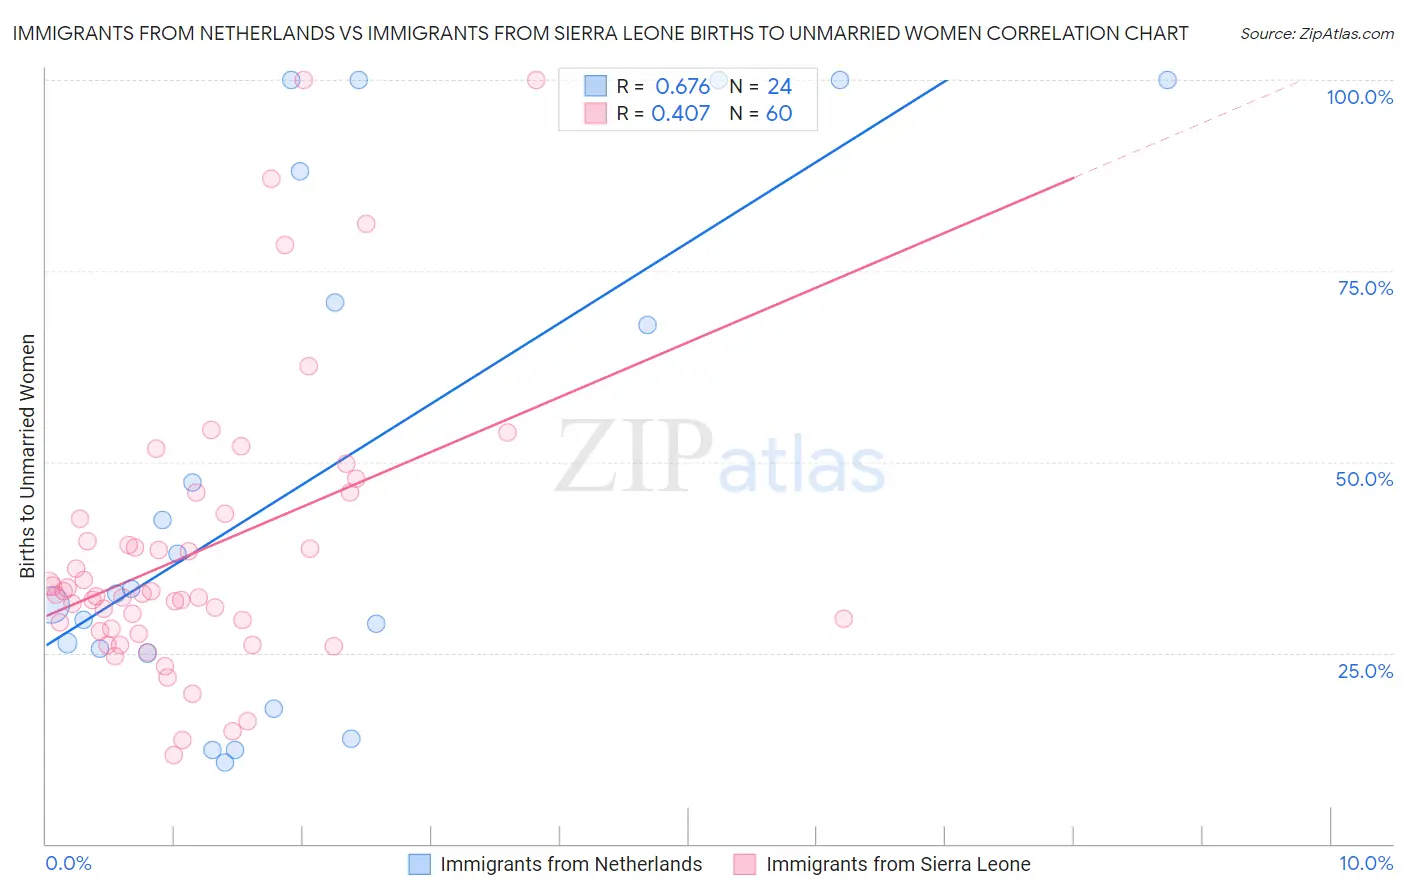 Immigrants from Netherlands vs Immigrants from Sierra Leone Births to Unmarried Women